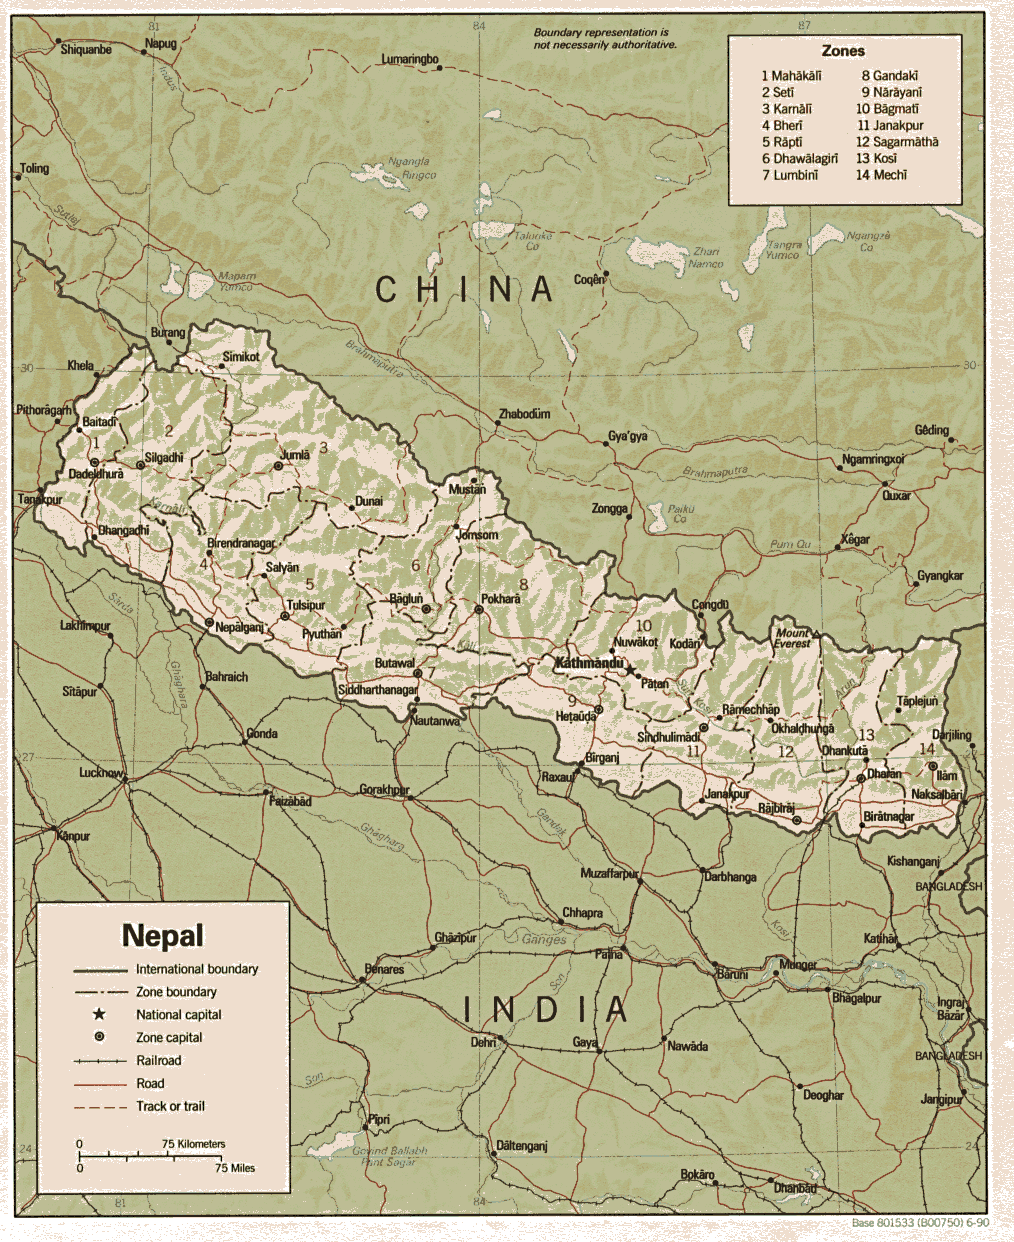 http://www.lib.utexas.edu/maps/middle_east_and_asia/nepal.gif